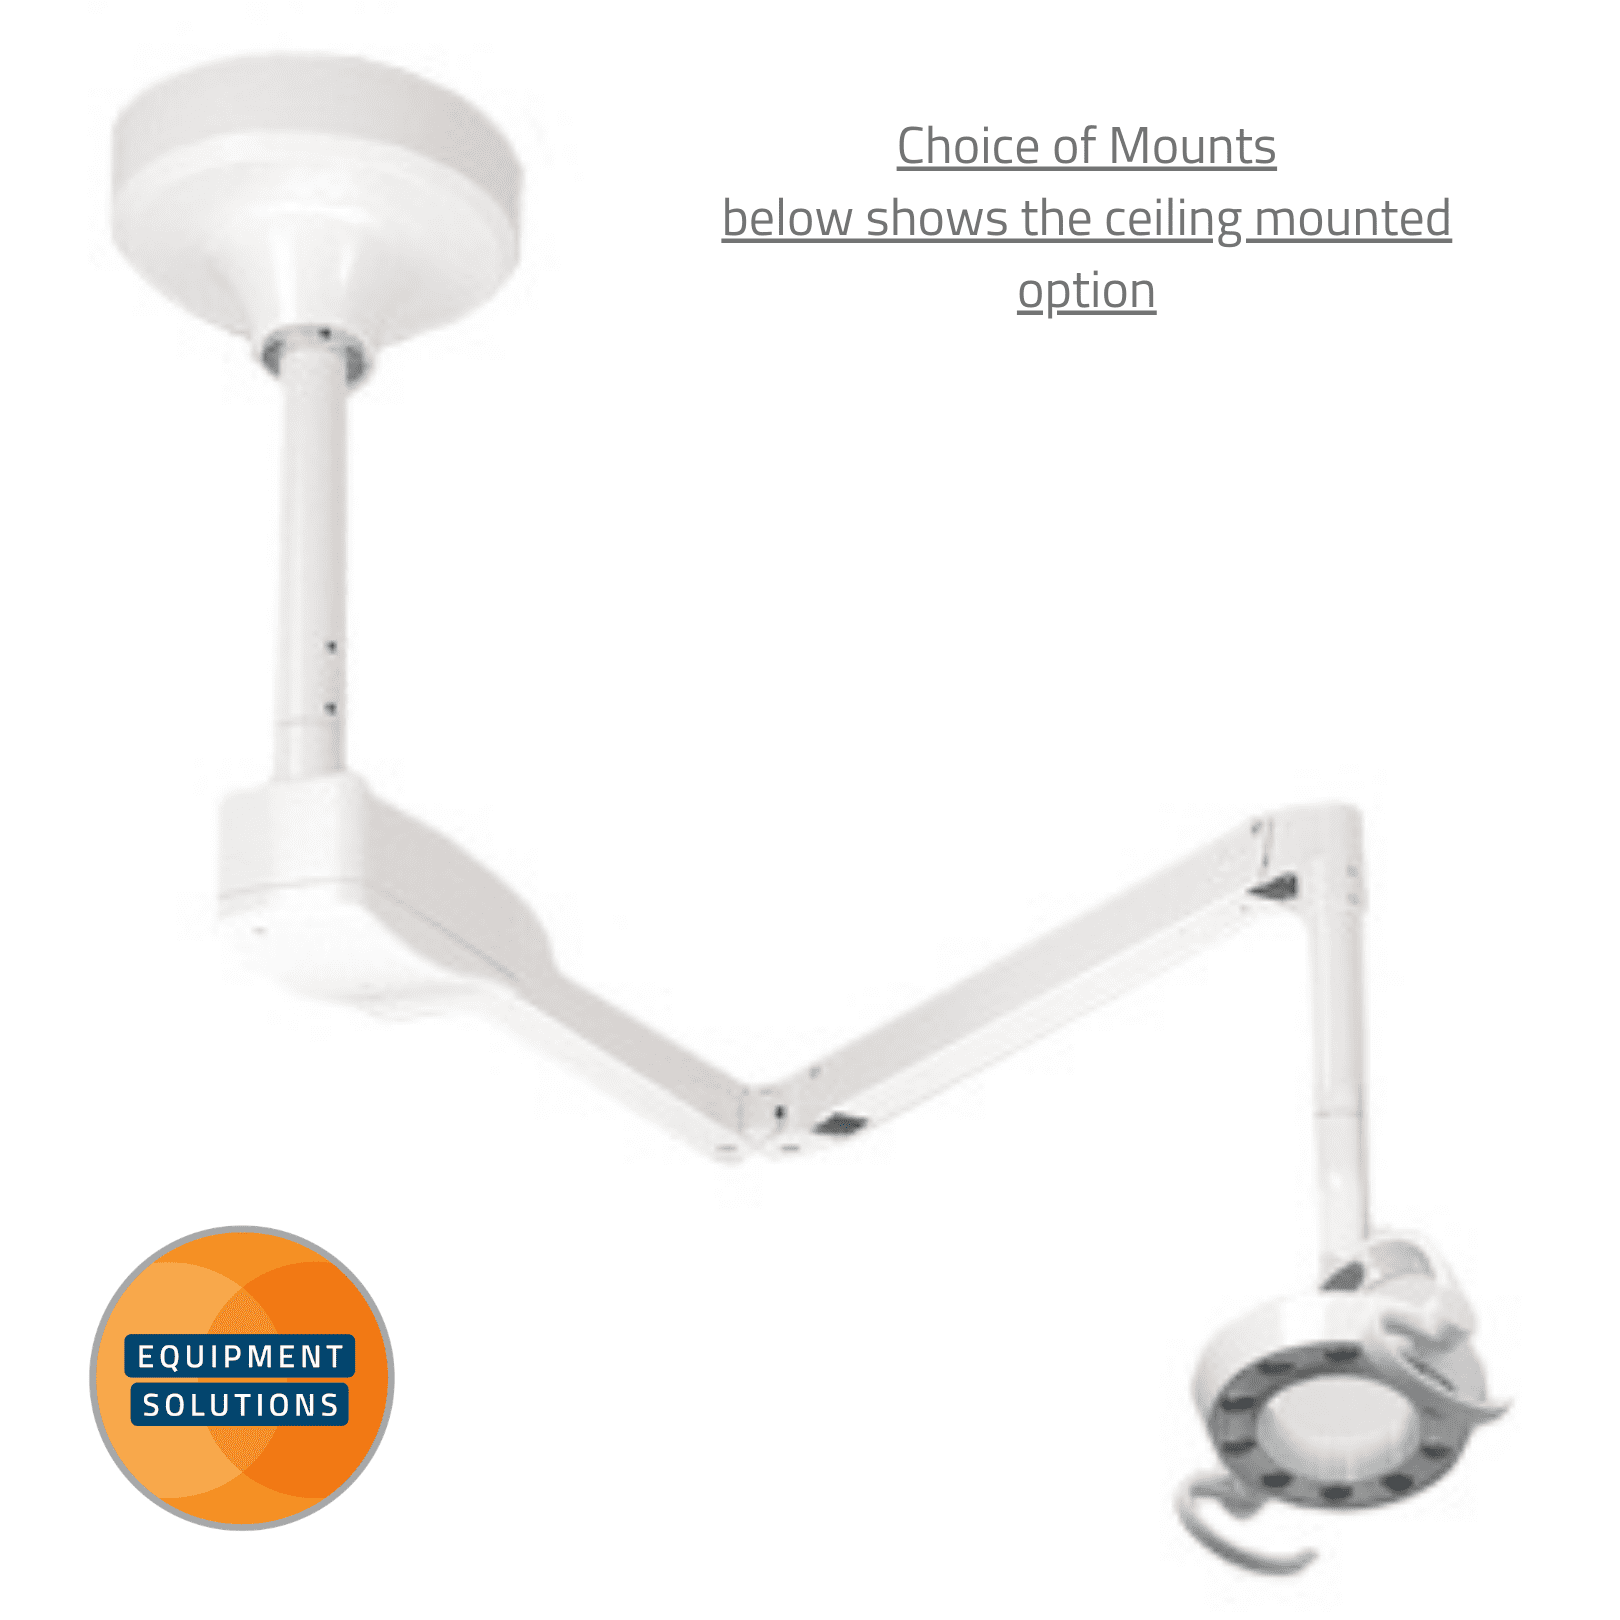 Belmont 900 LED Light with a ceiling mount